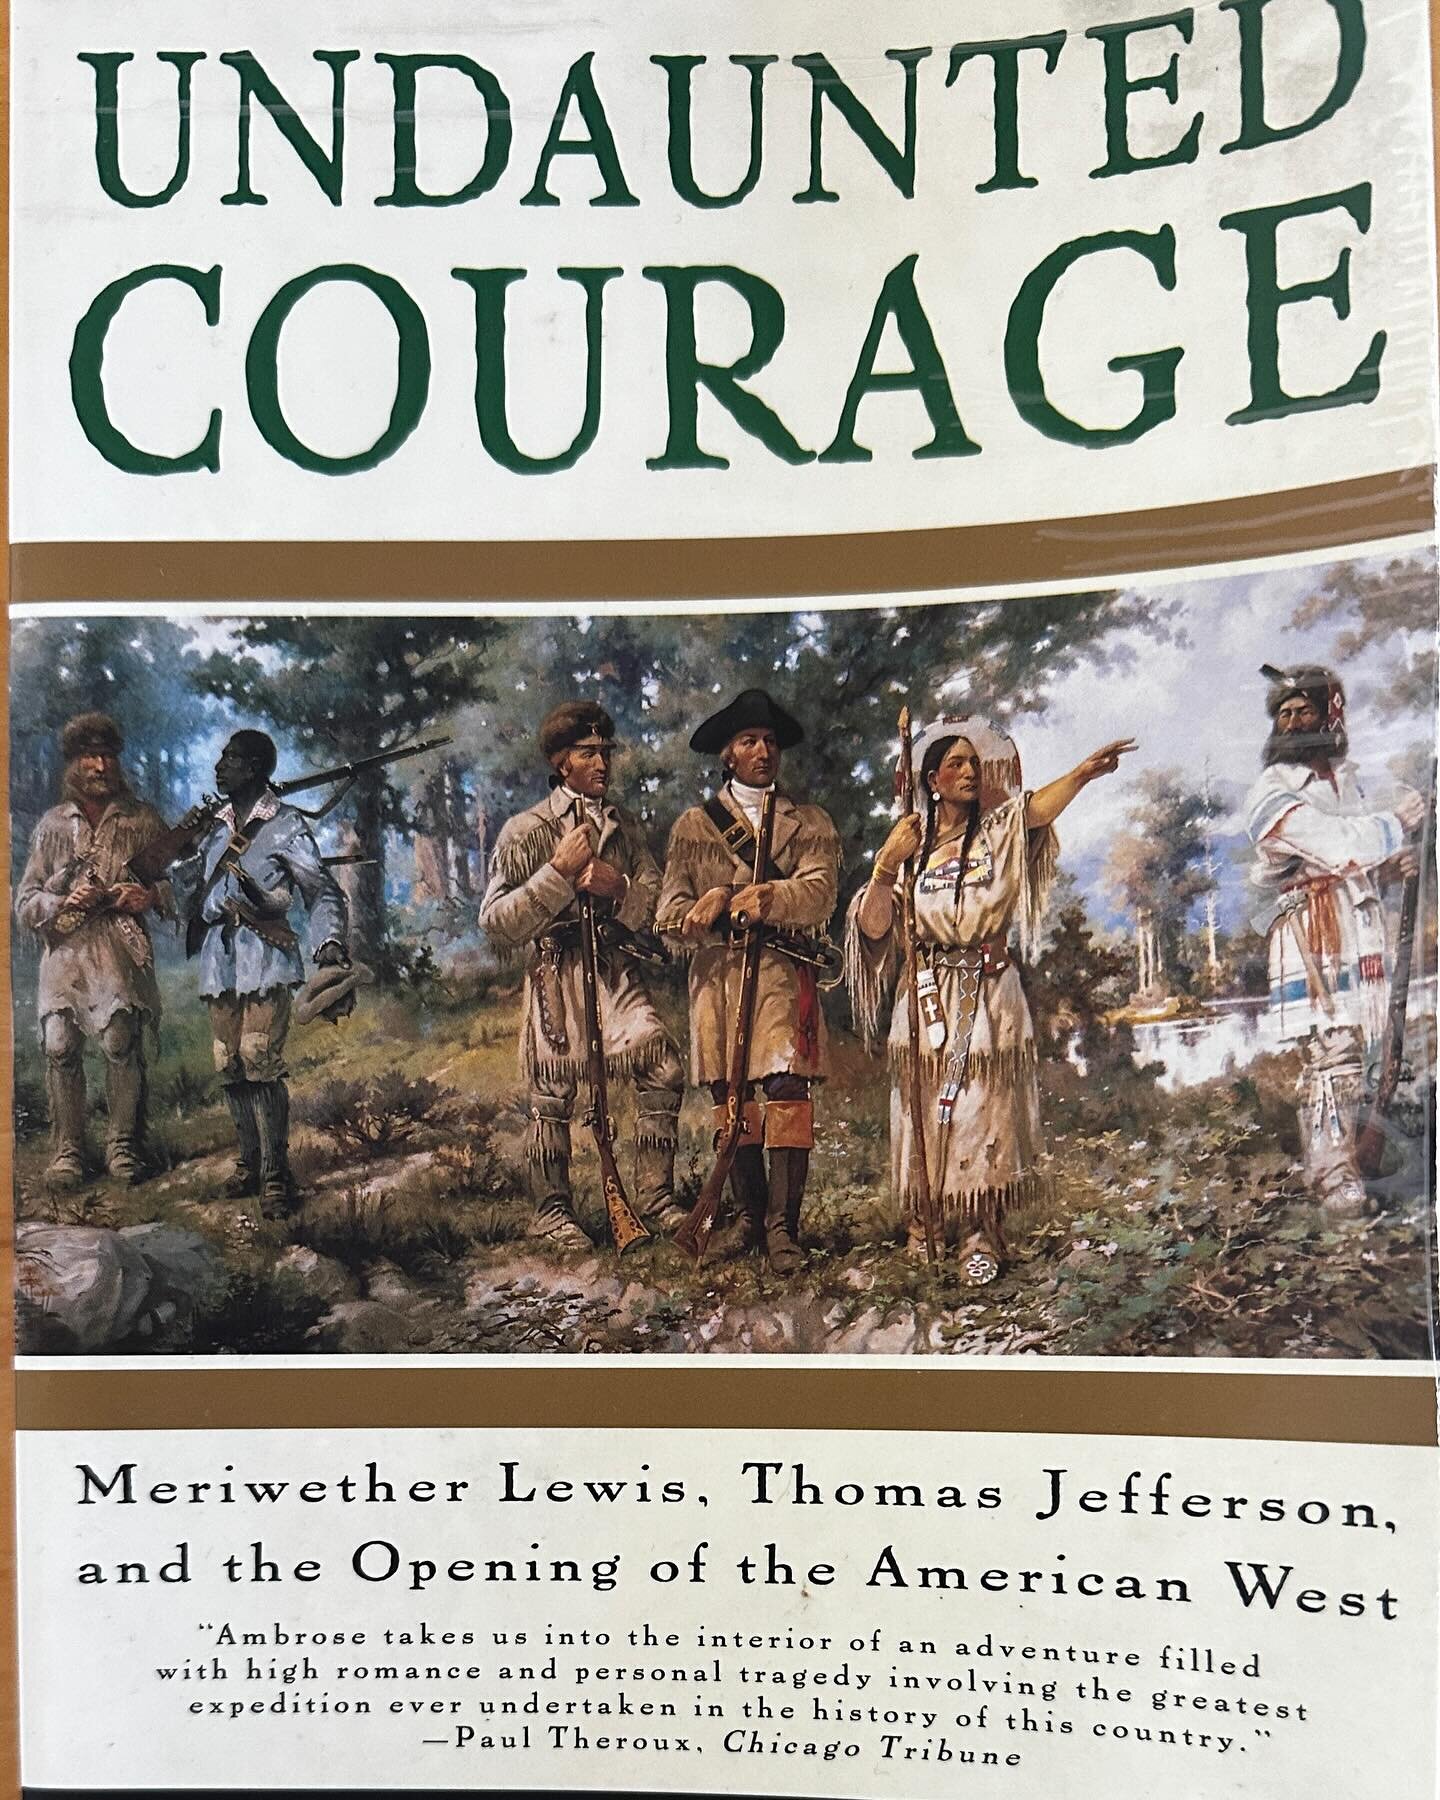 If you&rsquo;re interested in history this was a really good read. I couldn&rsquo;t put it down. I had no idea how challenging Lewis &amp; Clark&rsquo;s expedition was. #goodreads #history #book